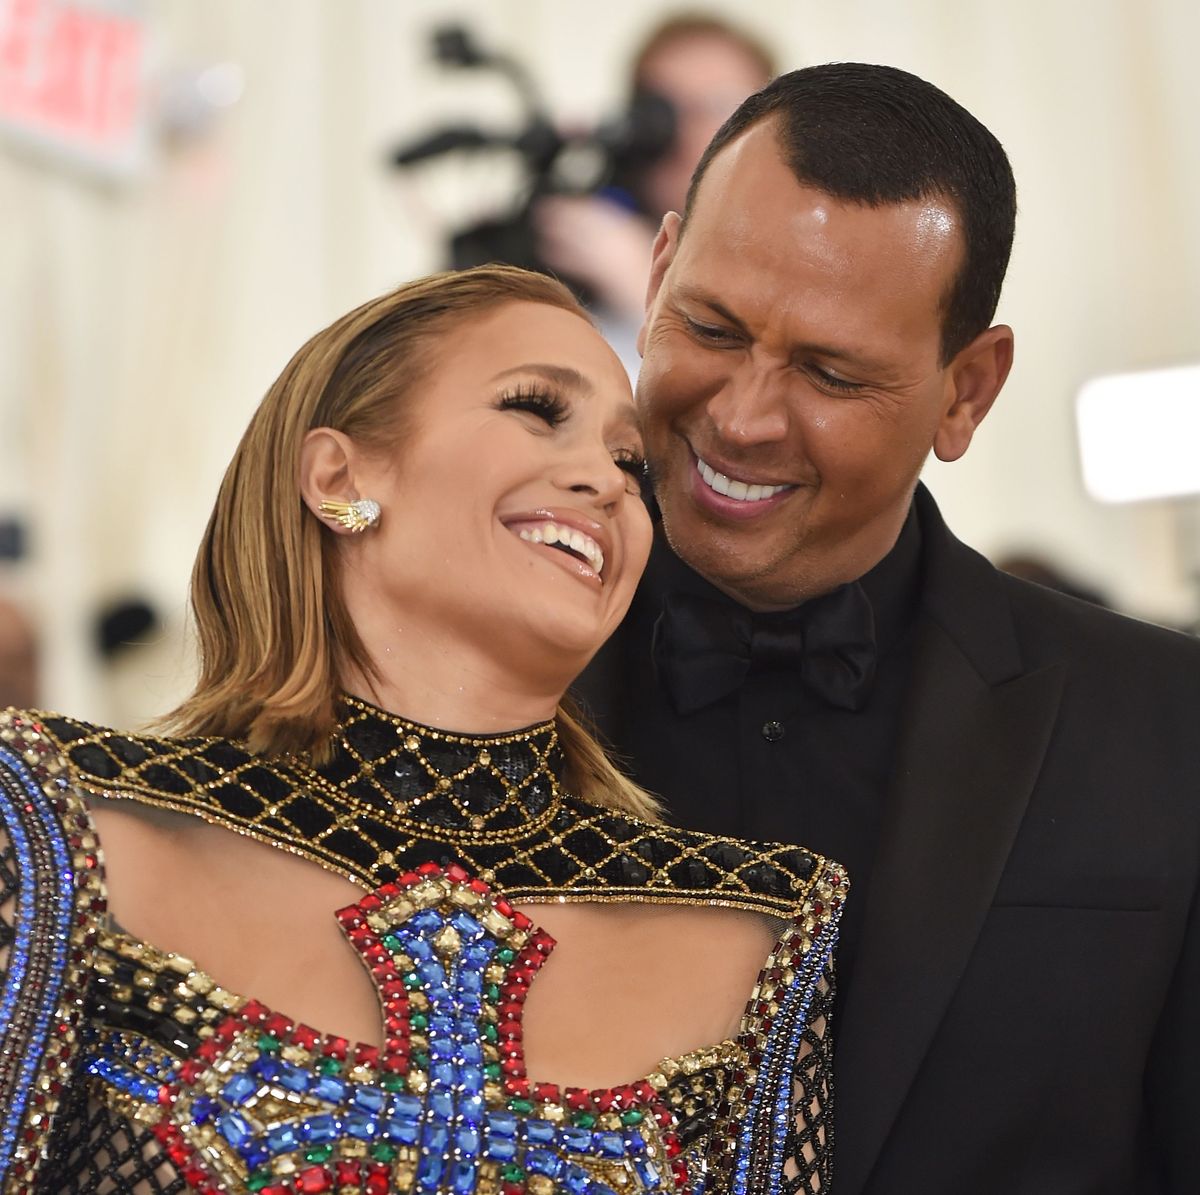 SLUGFEST: Jose Canseco accuses A-Rod of cheating on J-Lo